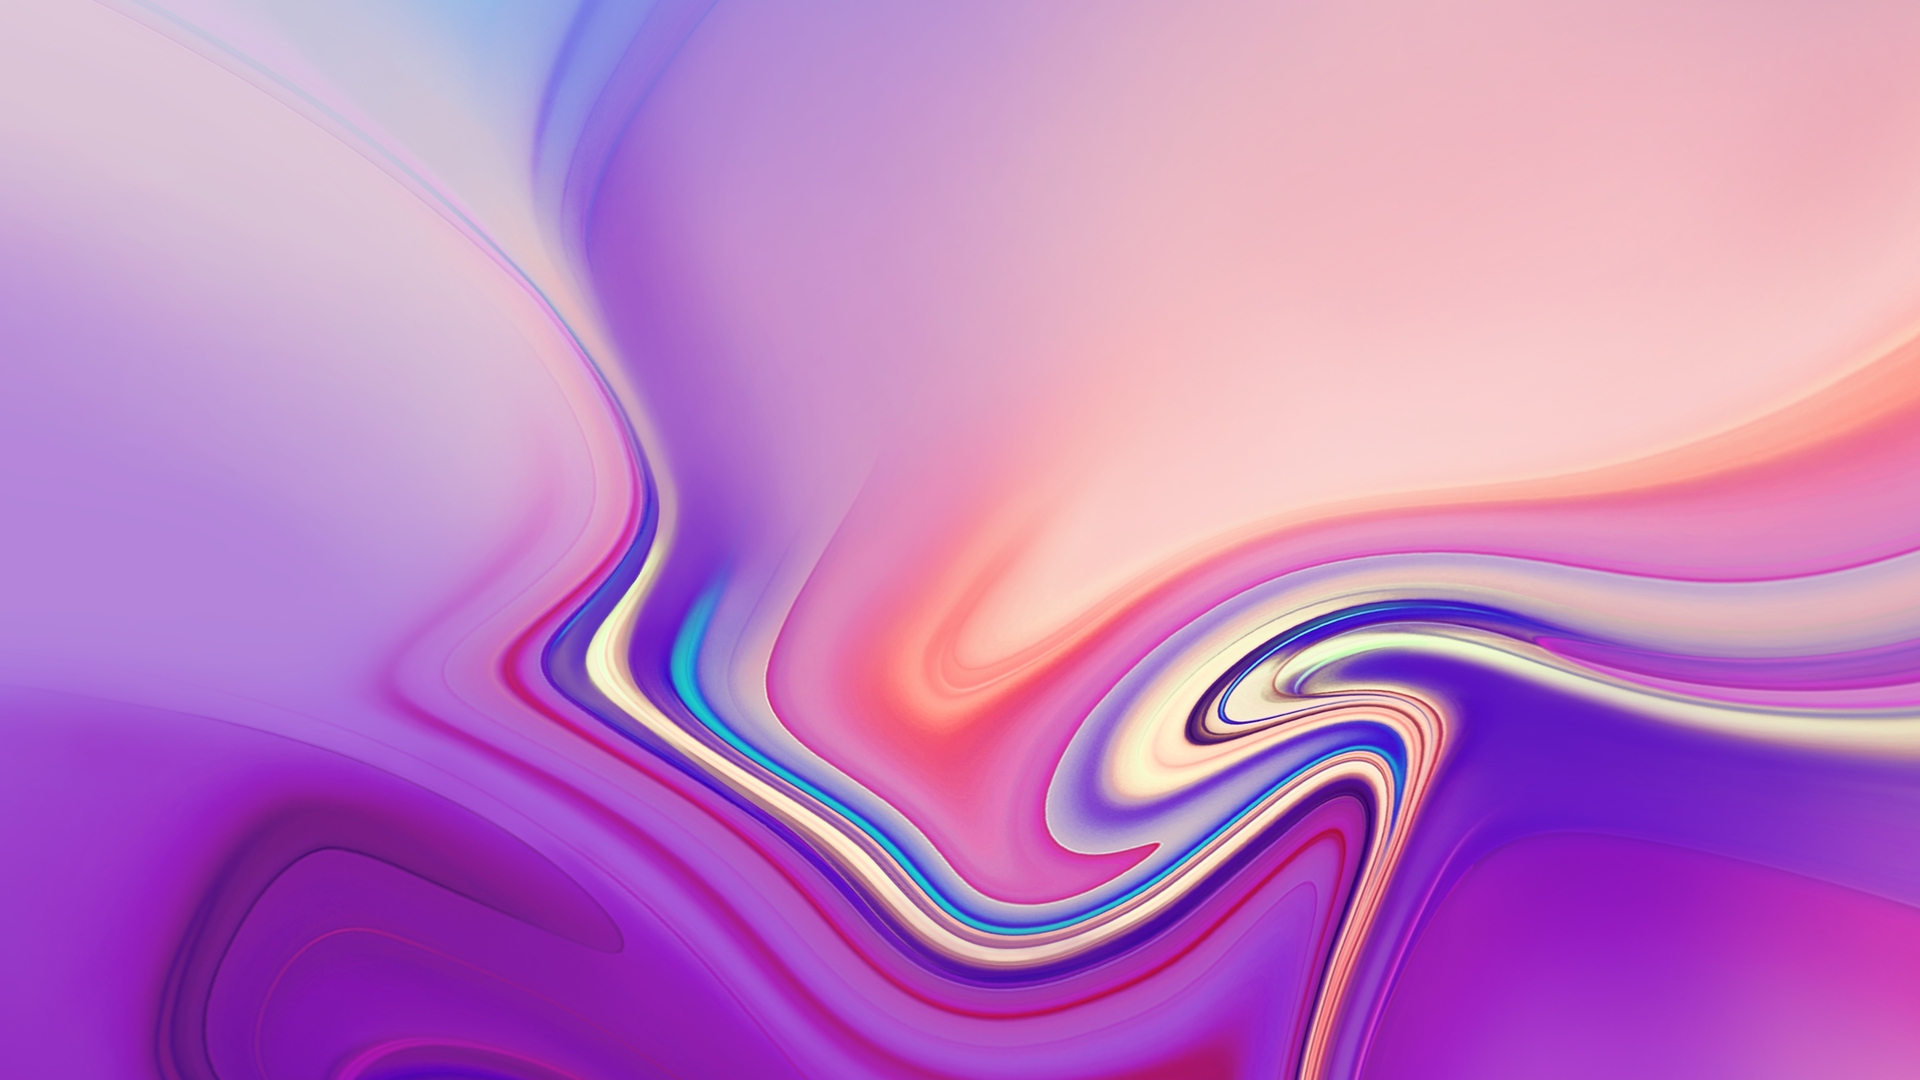 A purple and pink abstract Samsung Galaxy Note9 wallpaper - Galaxy